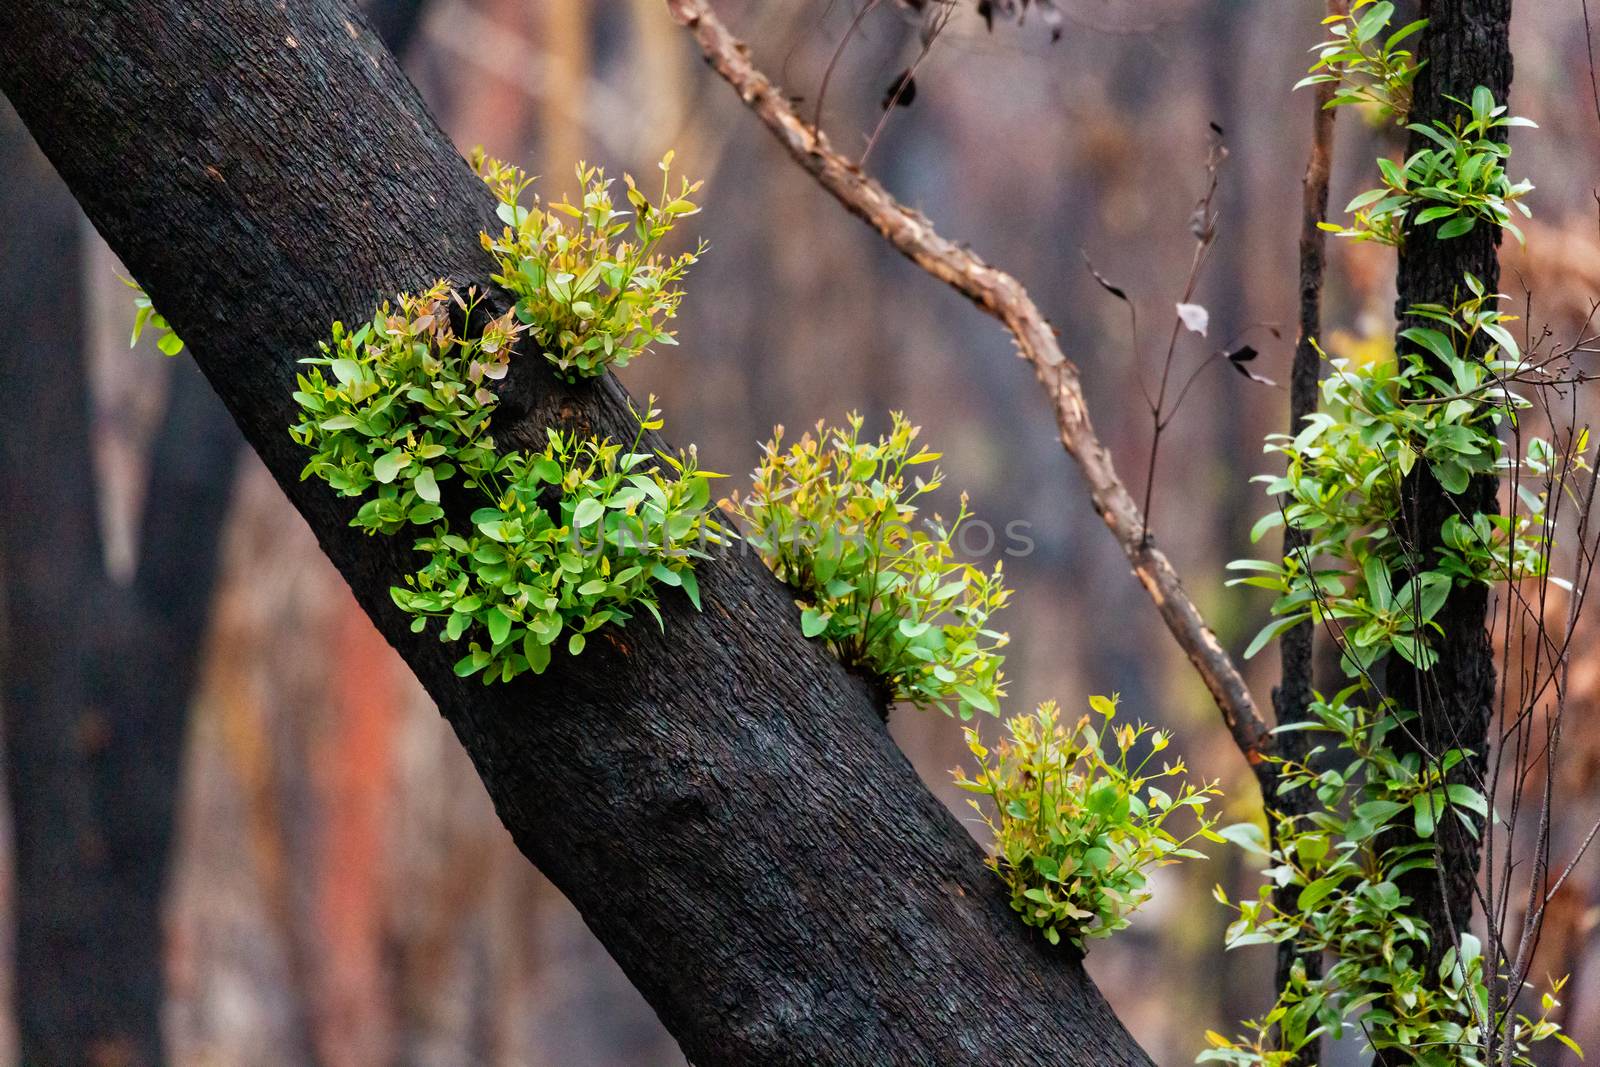 Trees recover after bush fires in Australia epicormic leaf growth by lovleah